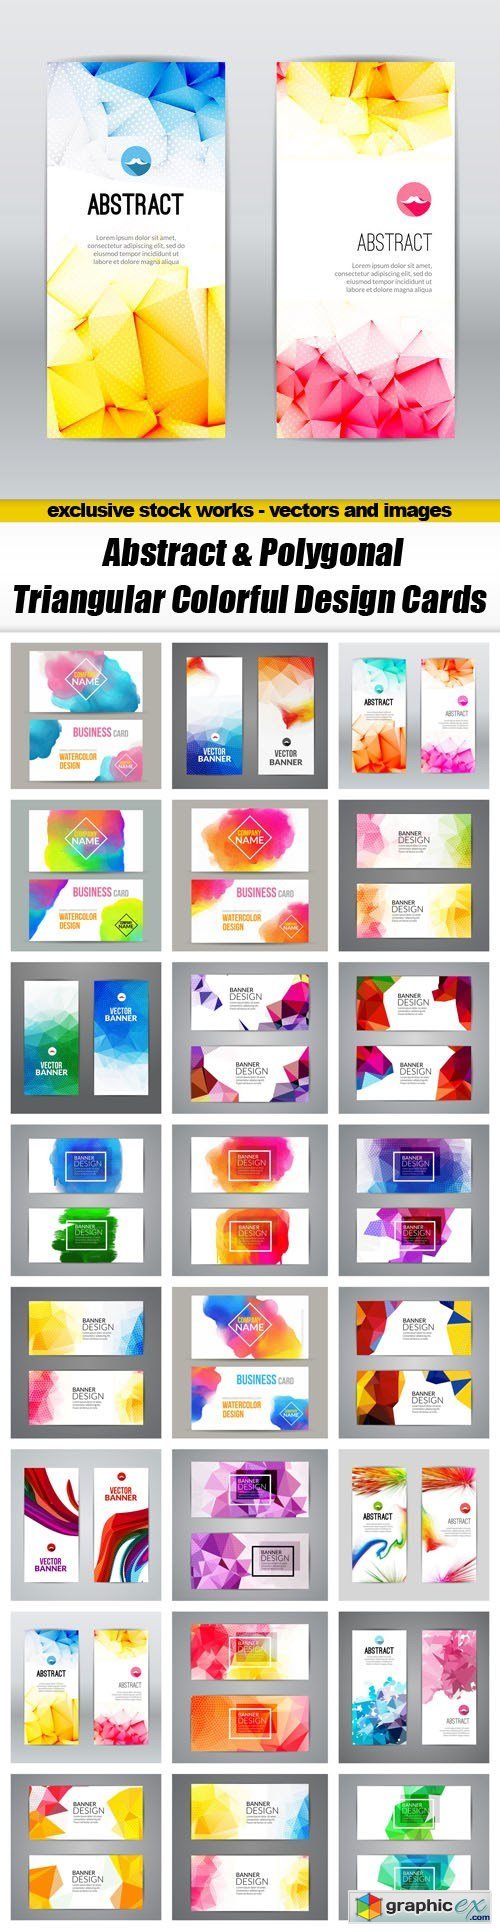 Abstract & Polygonal Triangular Colorful Design Cards - 24xEPS